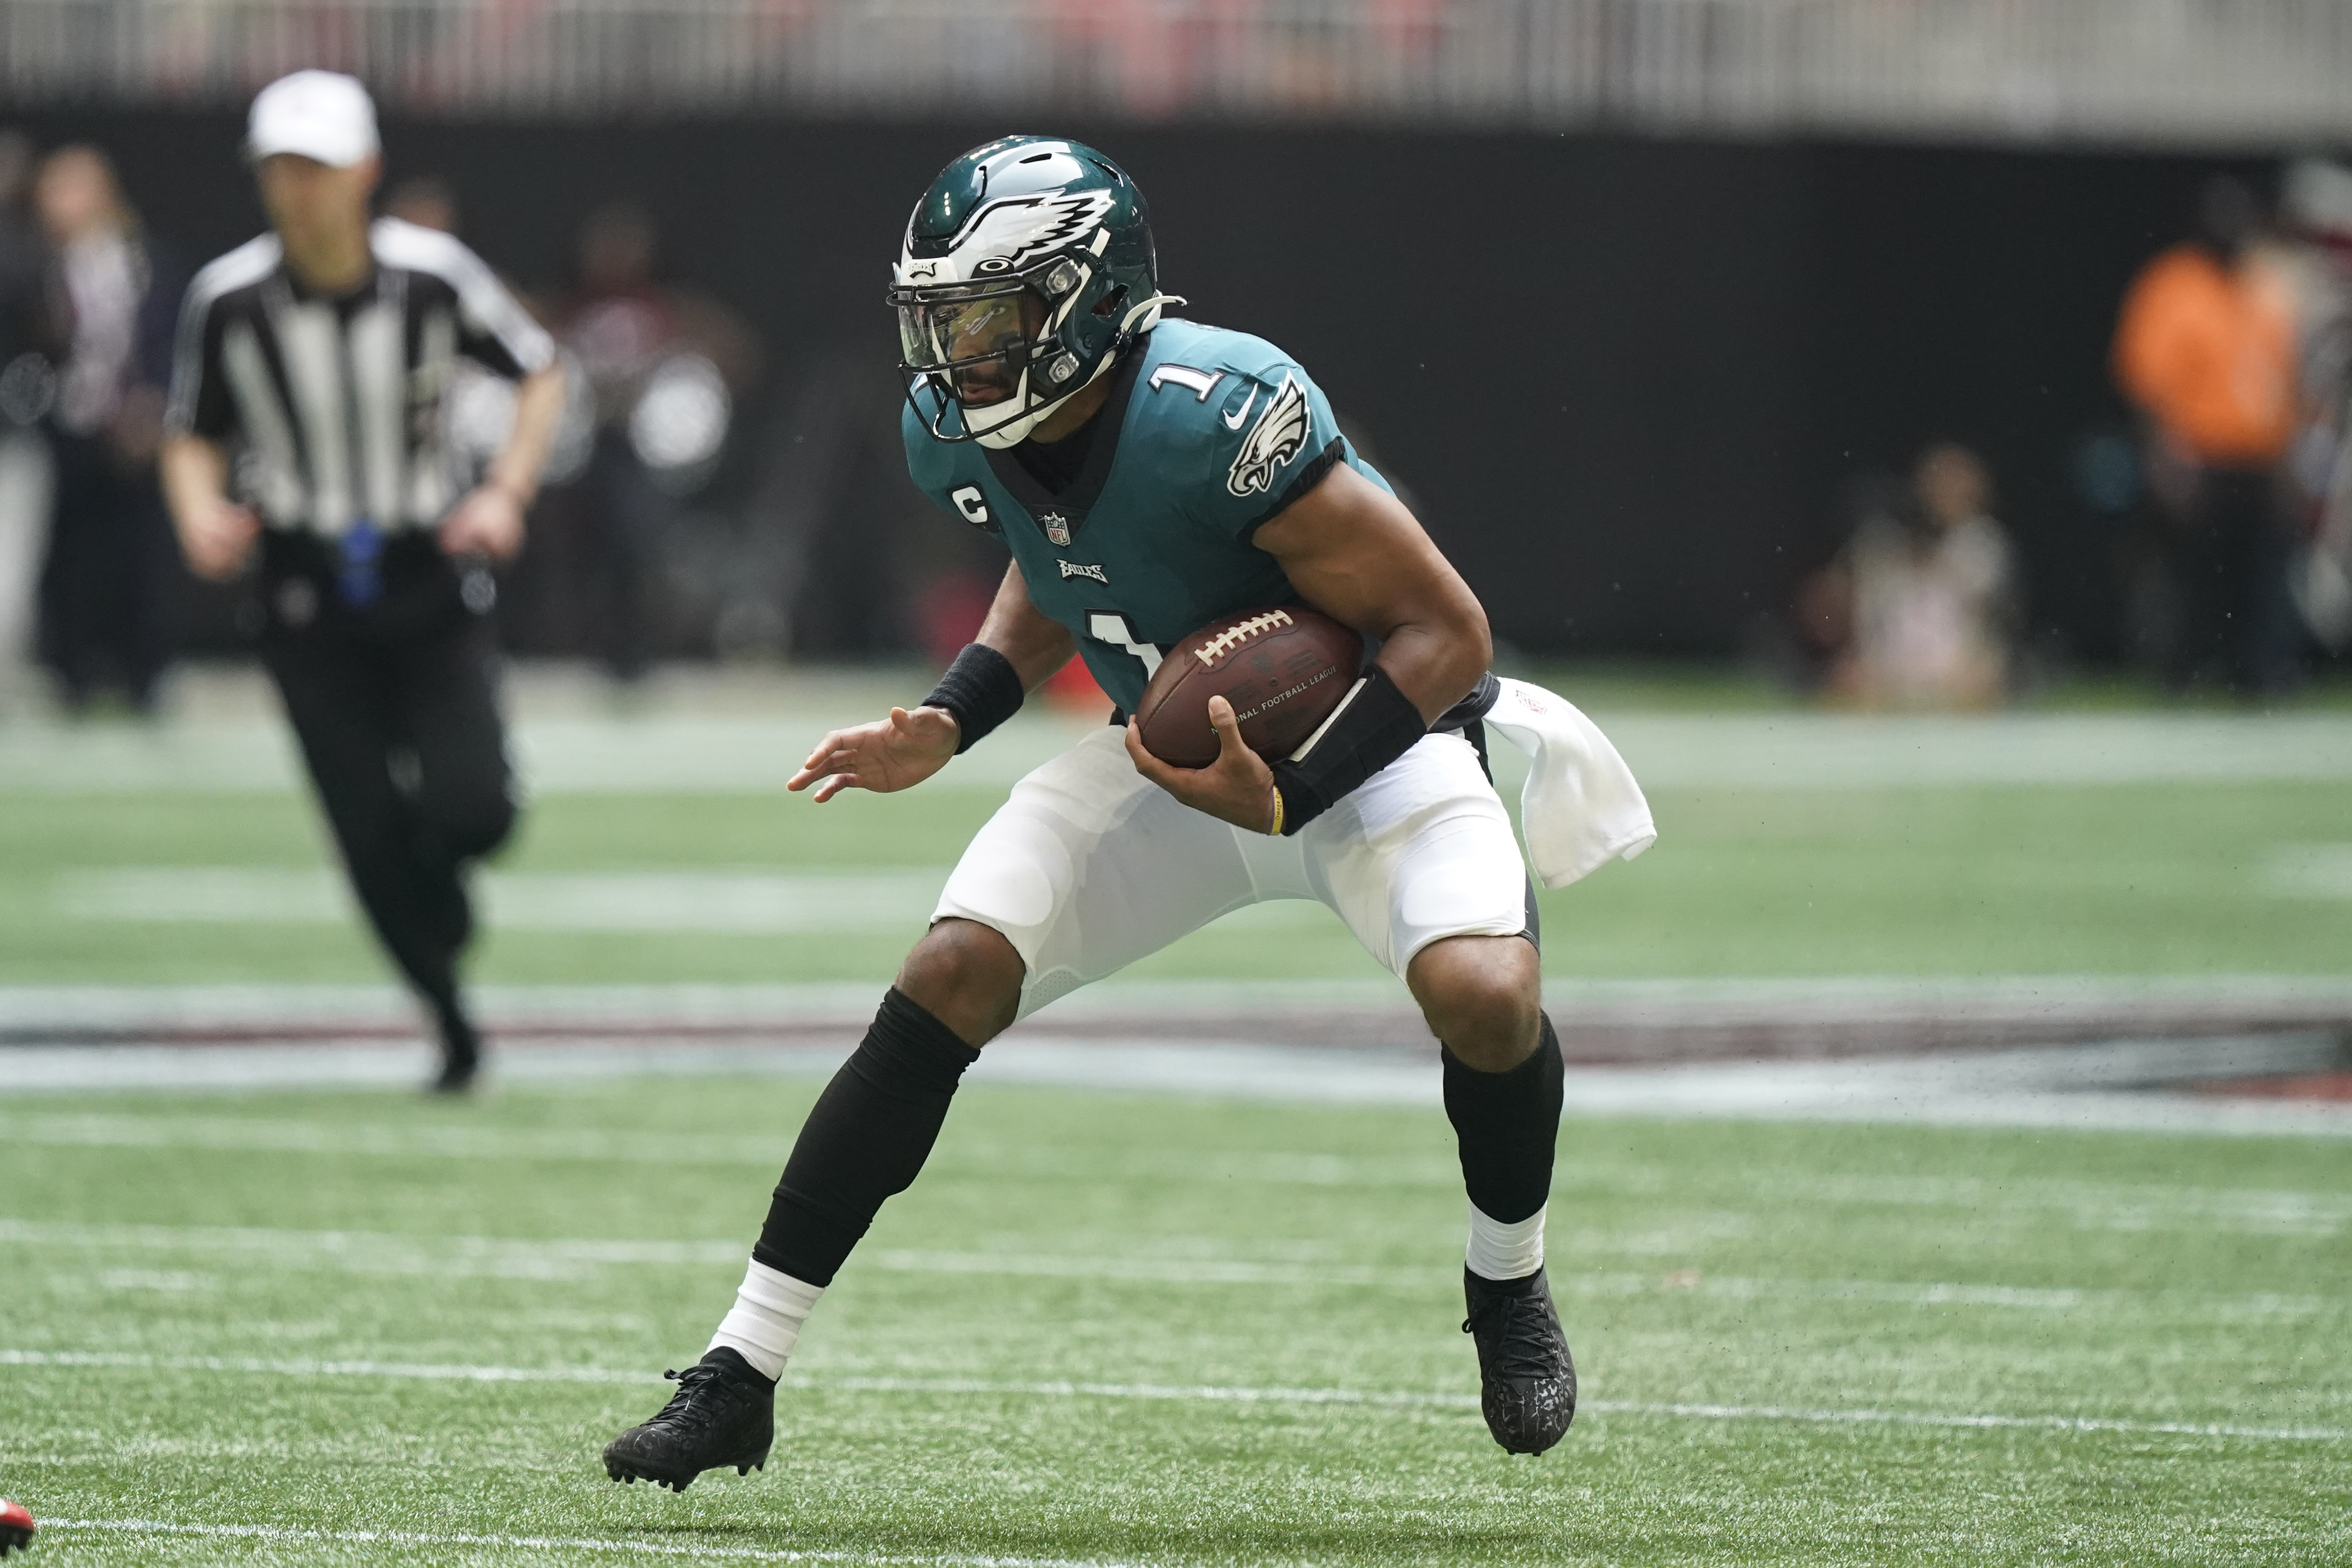 Eagles' Jalen Hurts Rises to No. 2 in NFL Jersey Sales After 500